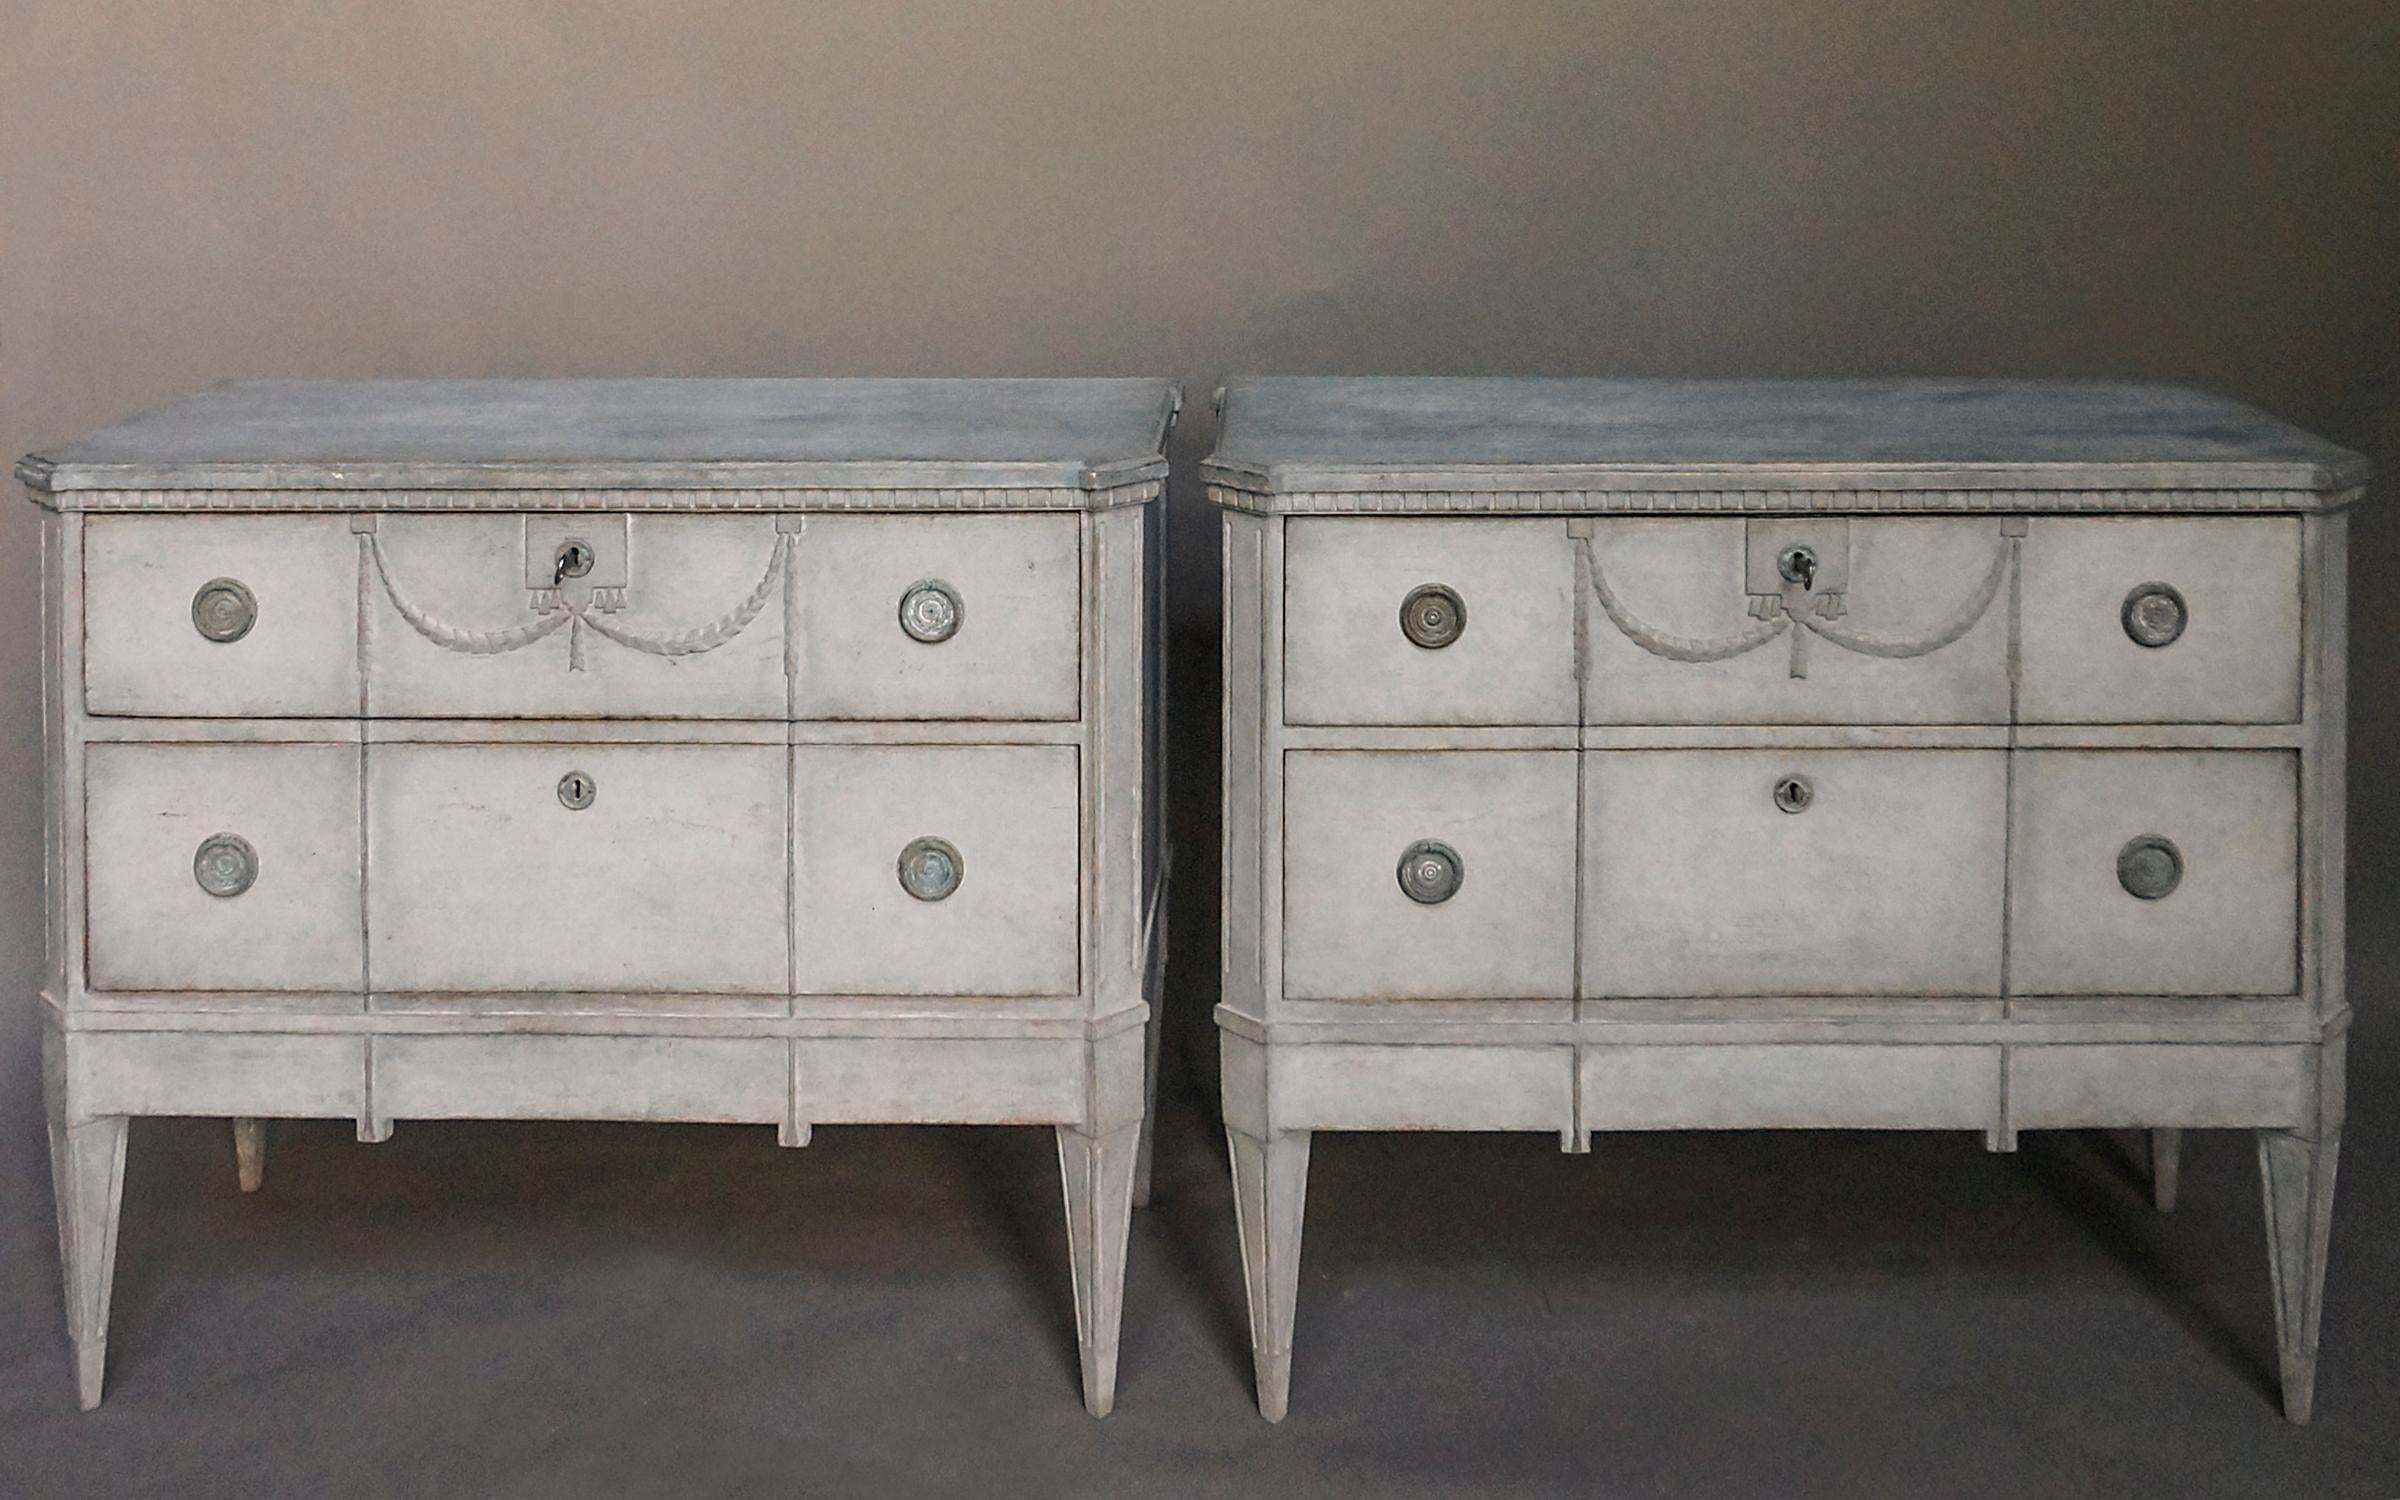 Pair of two-drawer commodes in the Gustavian style, Sweden, circa 1870 with applied swags and tassels. Dentil molding under the shaped top, canted corners and tapering square legs.